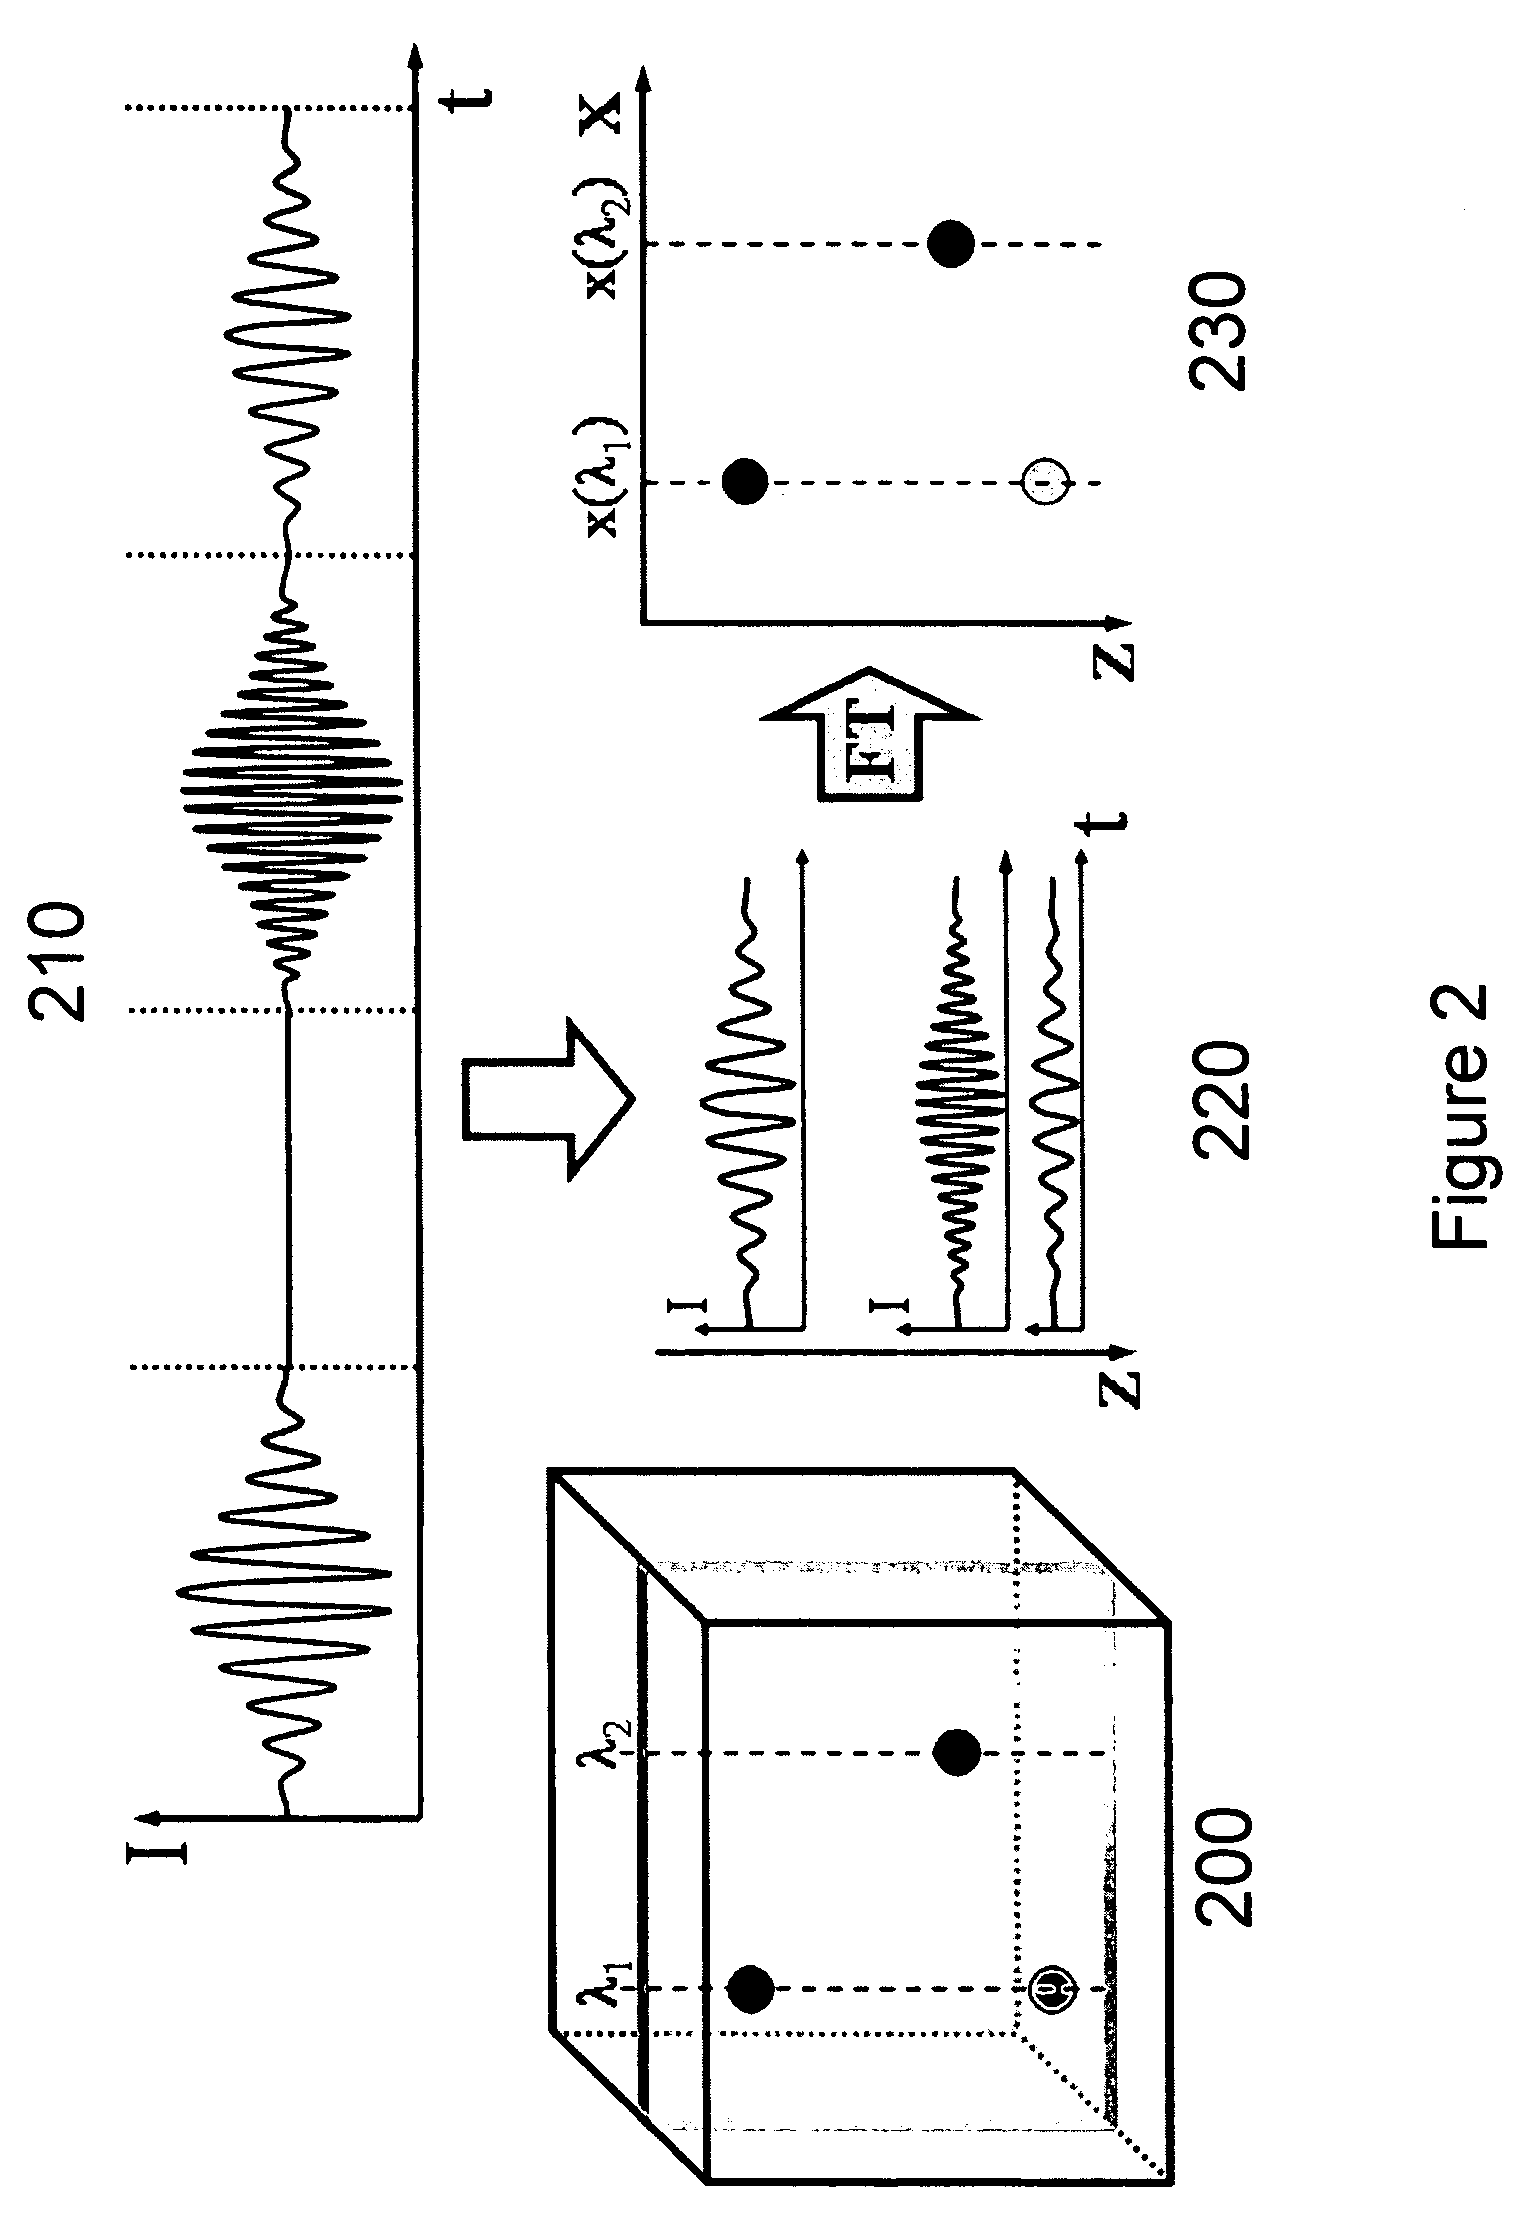 System, method and arrangement which can use spectral encoding heterodyne interferometry techniques for imaging